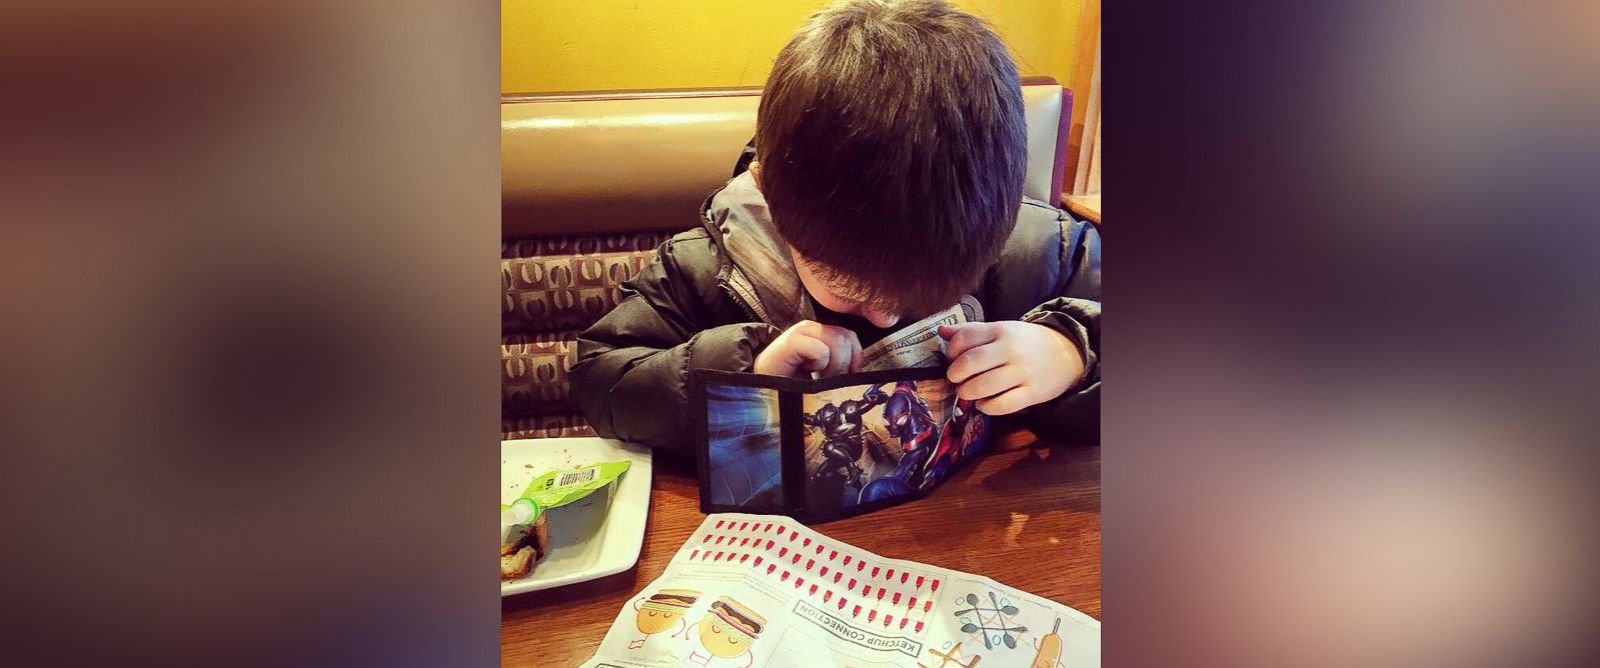 6-Year-Old Boy Treats His Mom to a 'Dinner Date' Once a Month With His Allowance Money